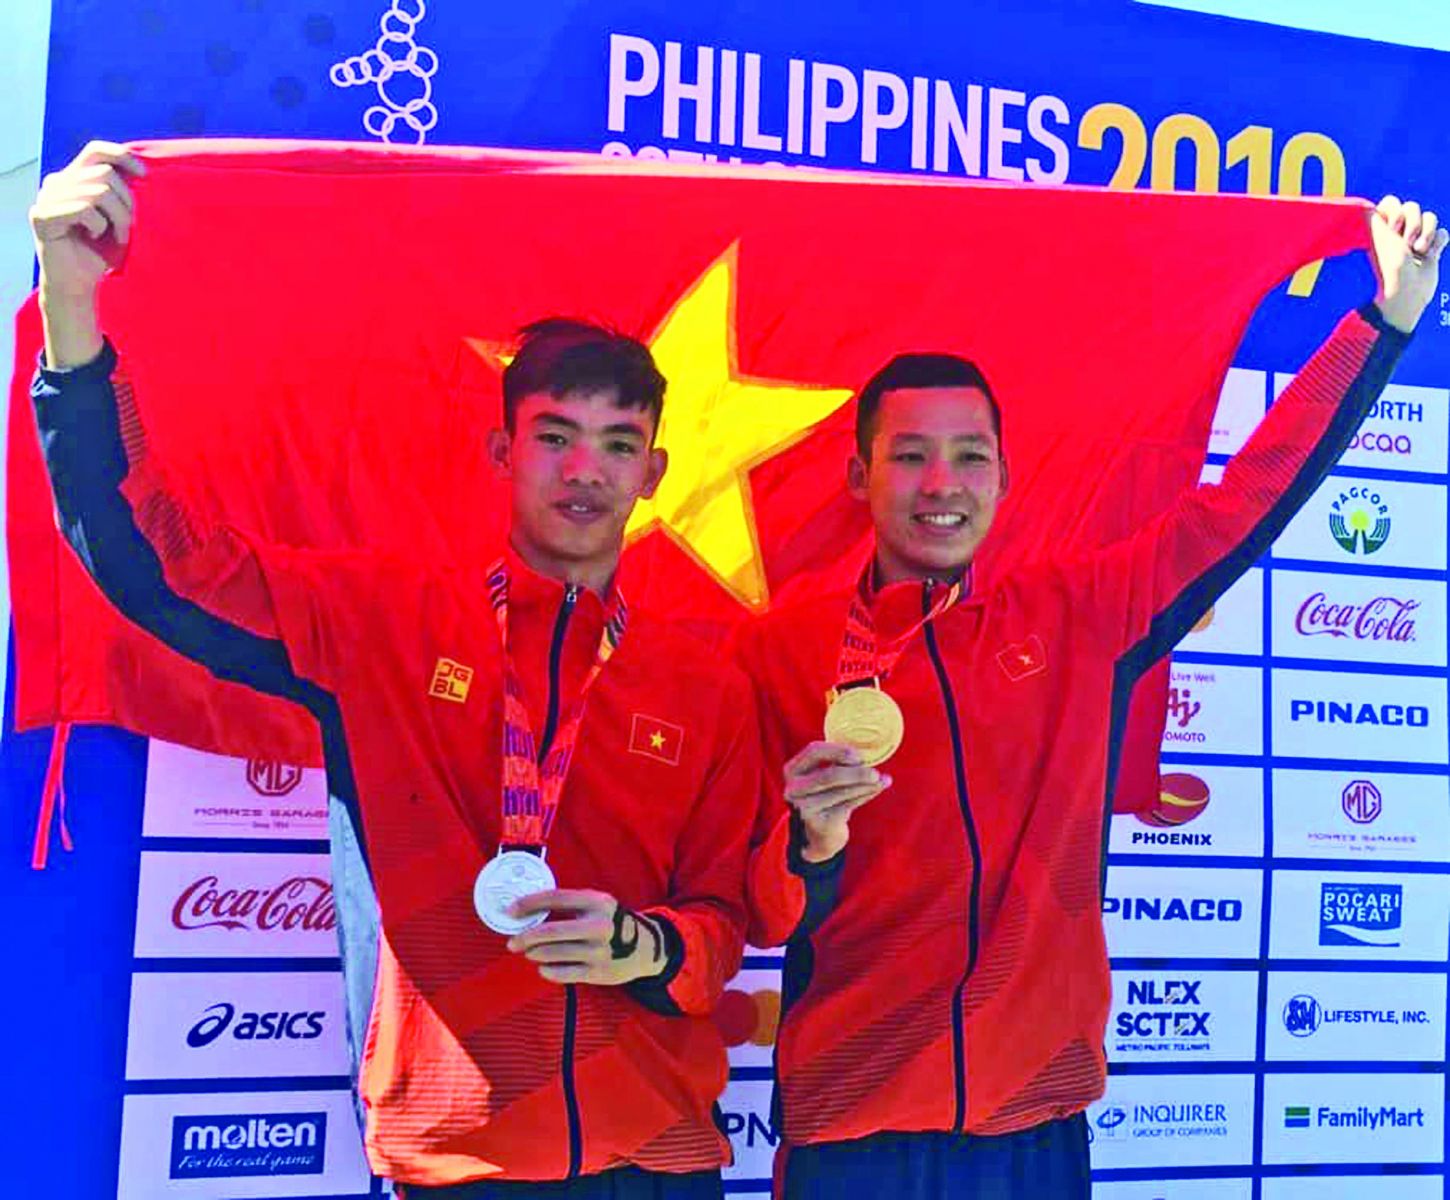 Athlete Tran Tan Trieu (R) won the SEA Games Gold Medal in swimming for 10-kilometer distance 